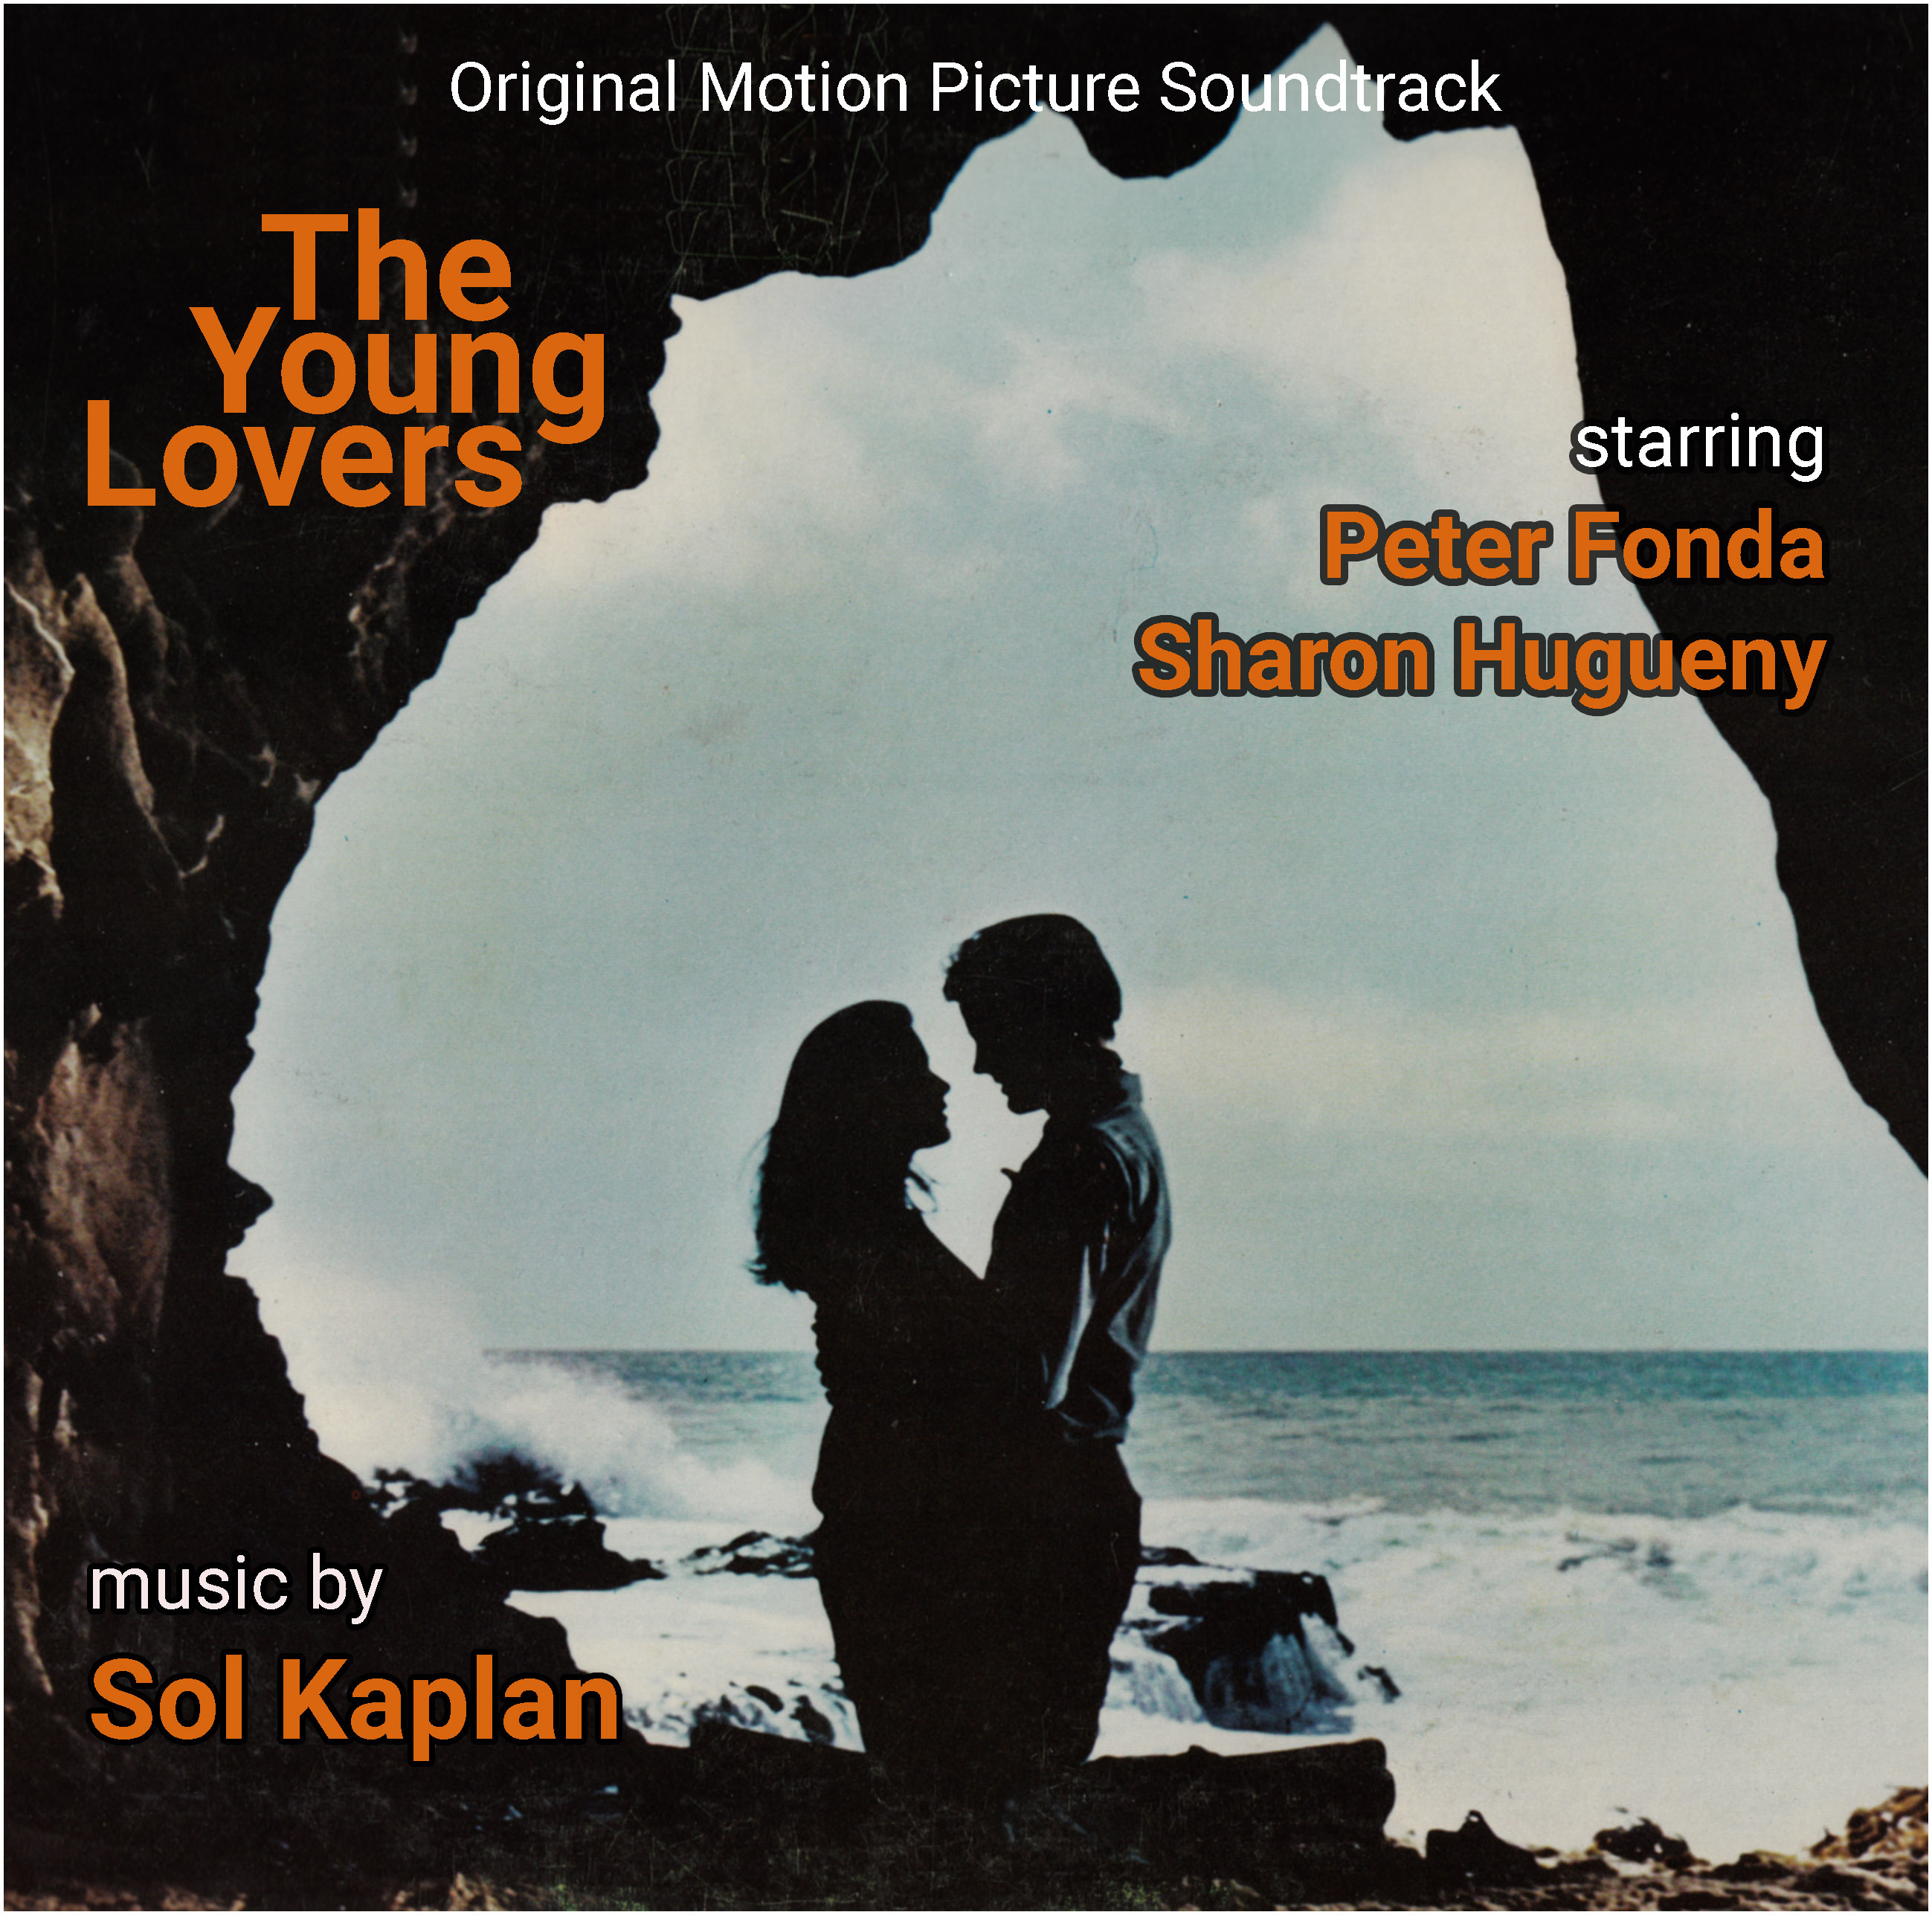 The Young Lovers by Sol Kaplan